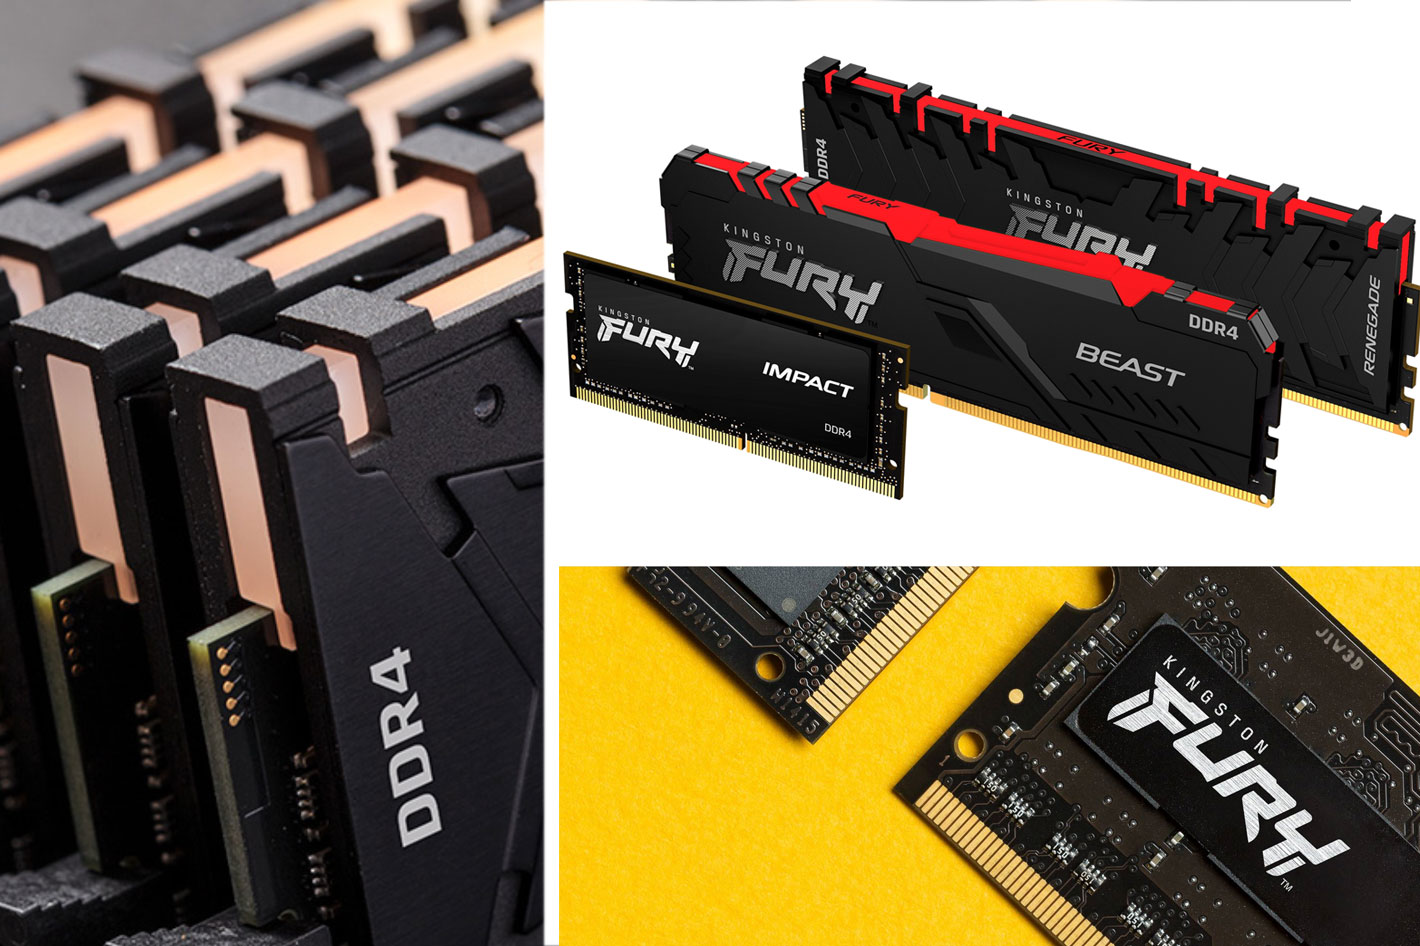 Kingston FURY Renegade DDR4 memory reaches up to 5333MHz